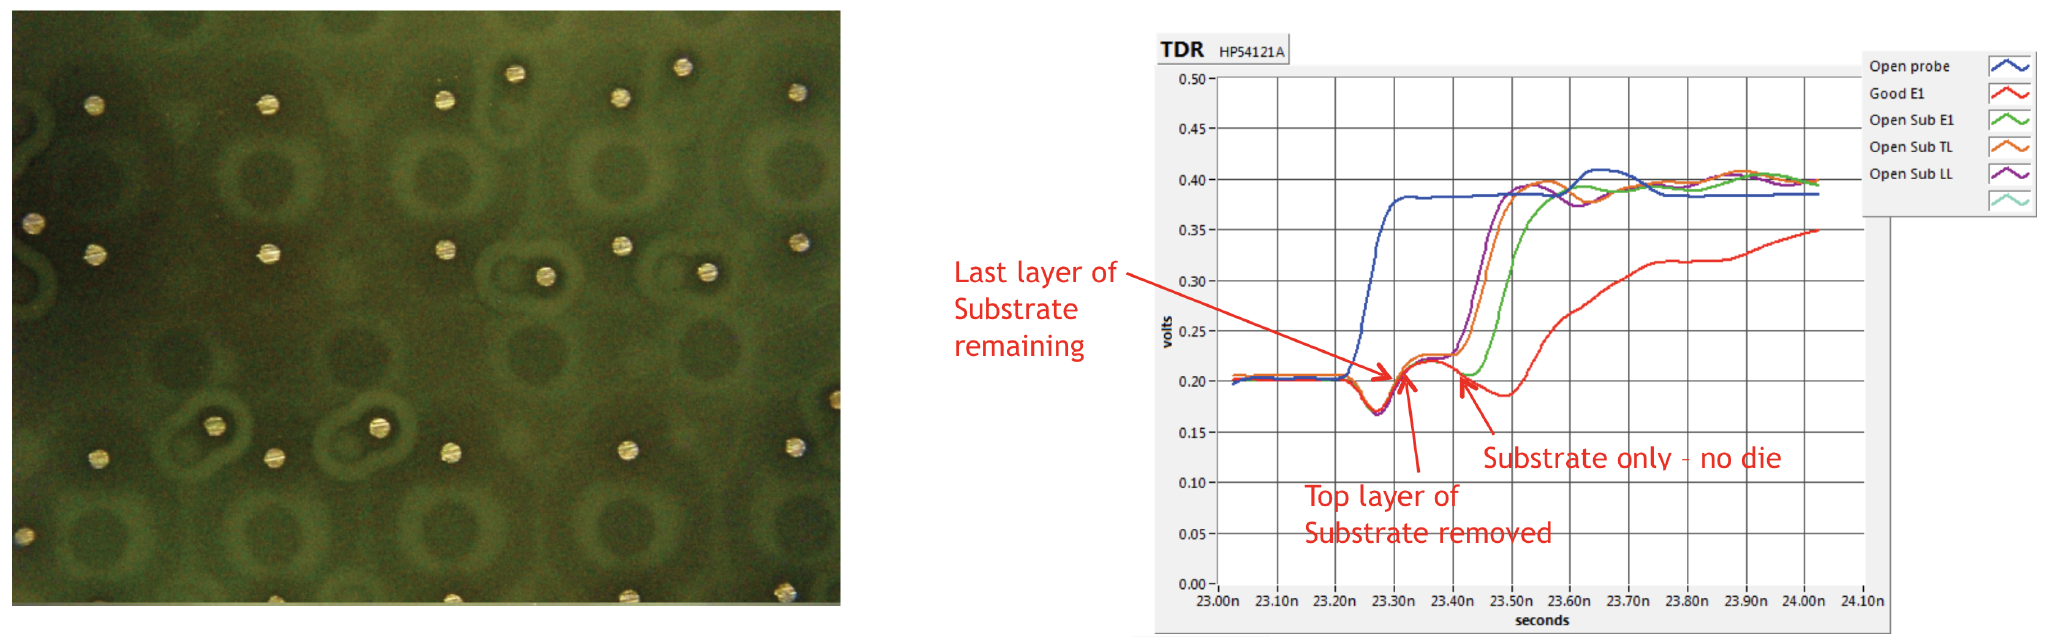 Time Domain Reflectometry (TDR) Last layer of substrate removed